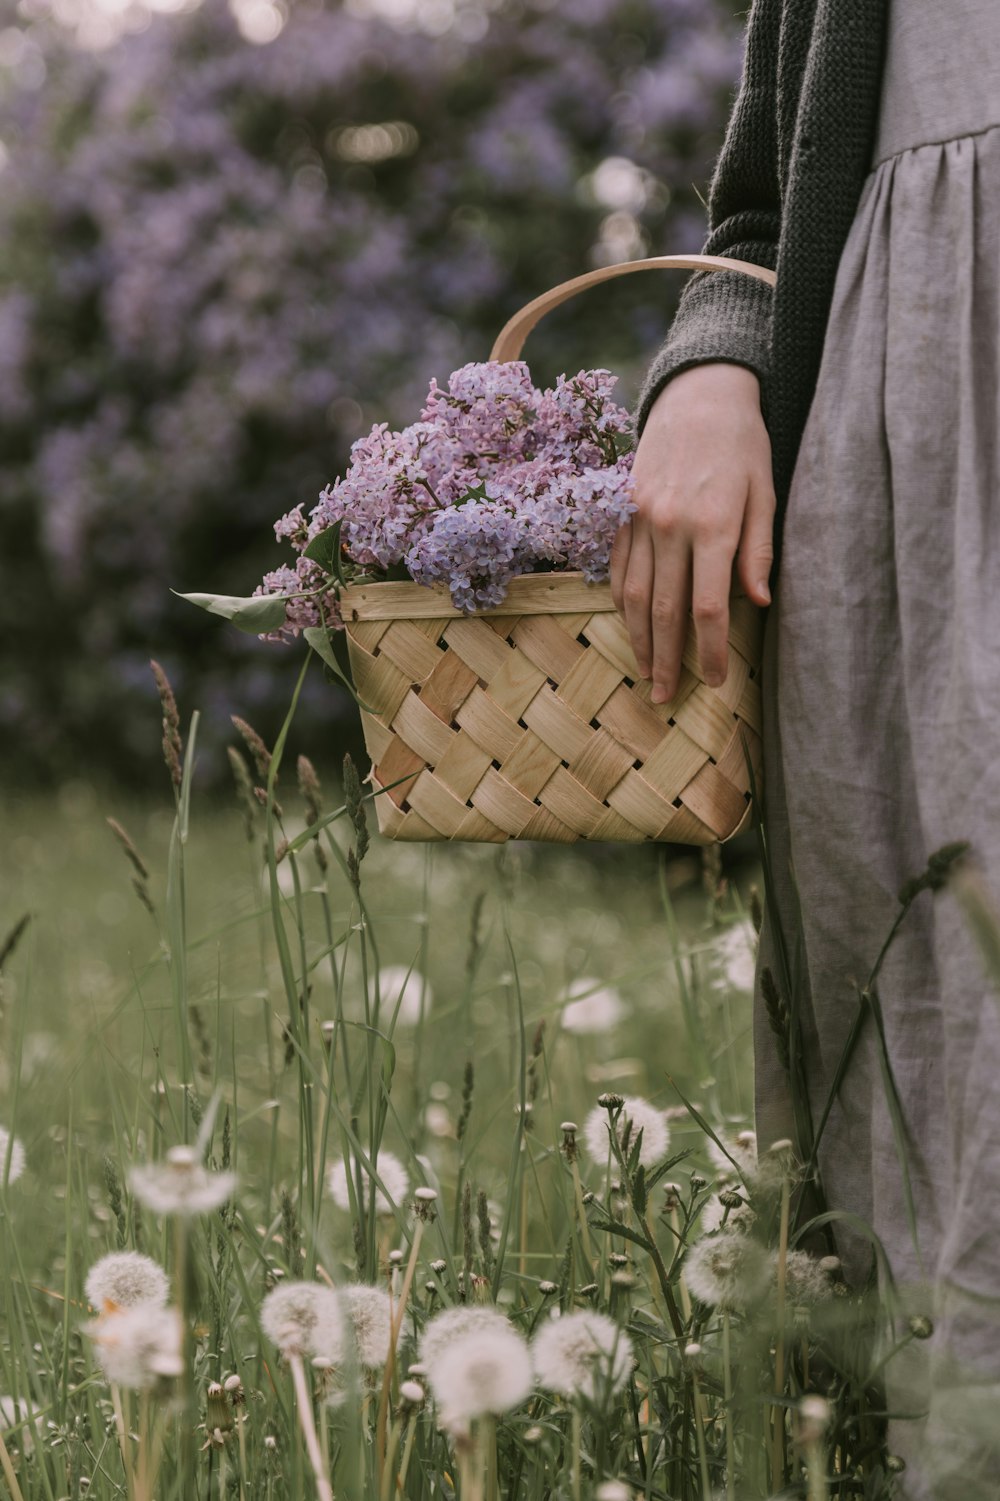 a person holding a basket with flowers in it